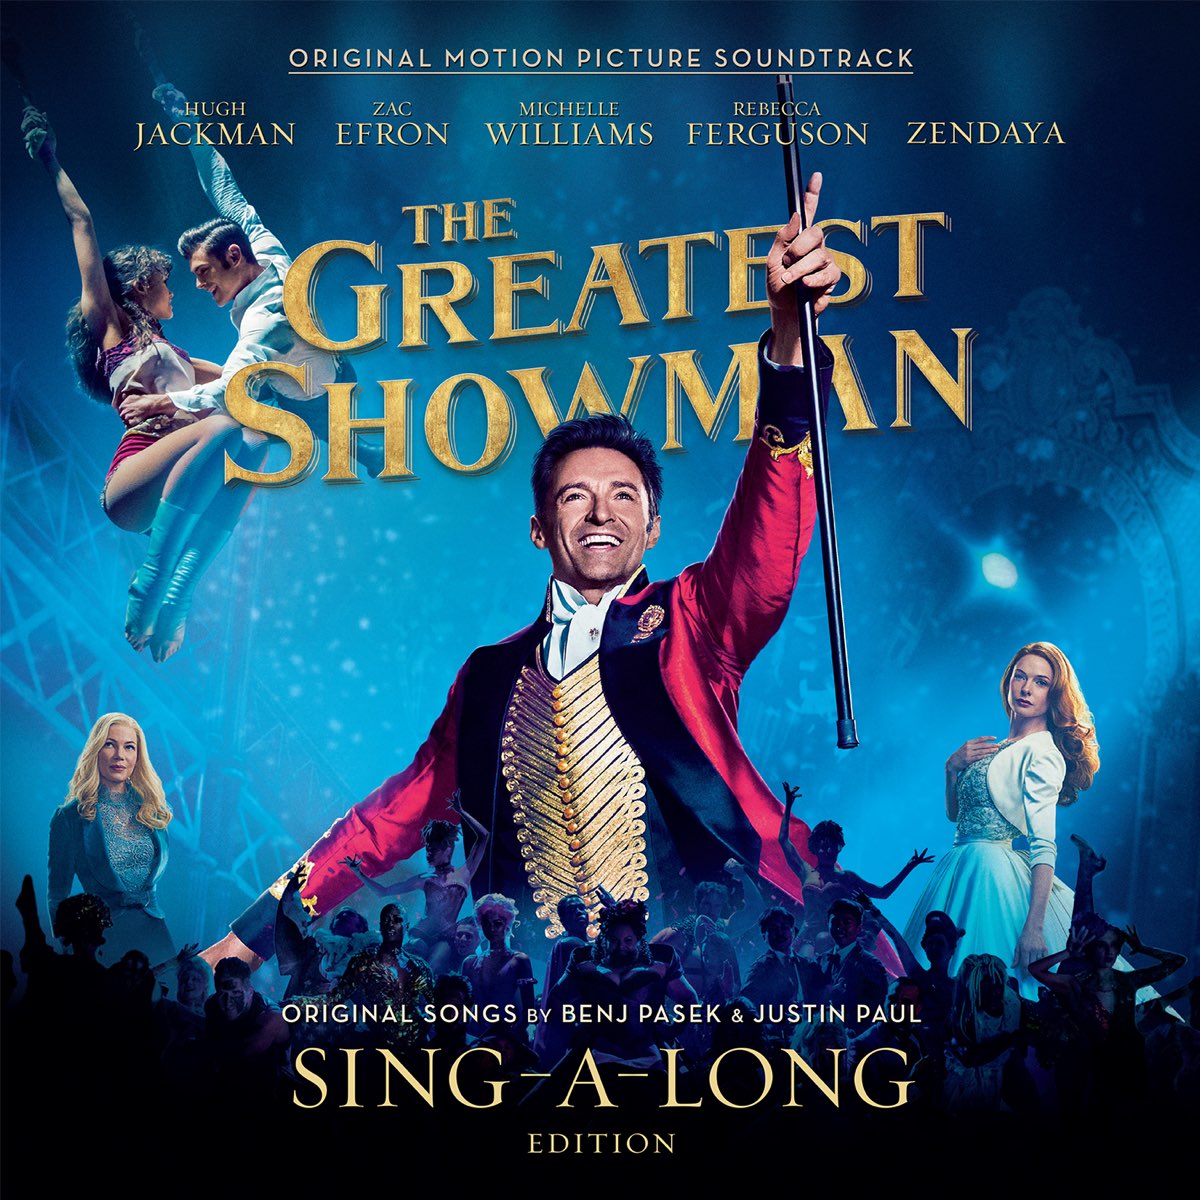 the-greatest-showman-original-motion-picture-soundtrack-sing-a-long